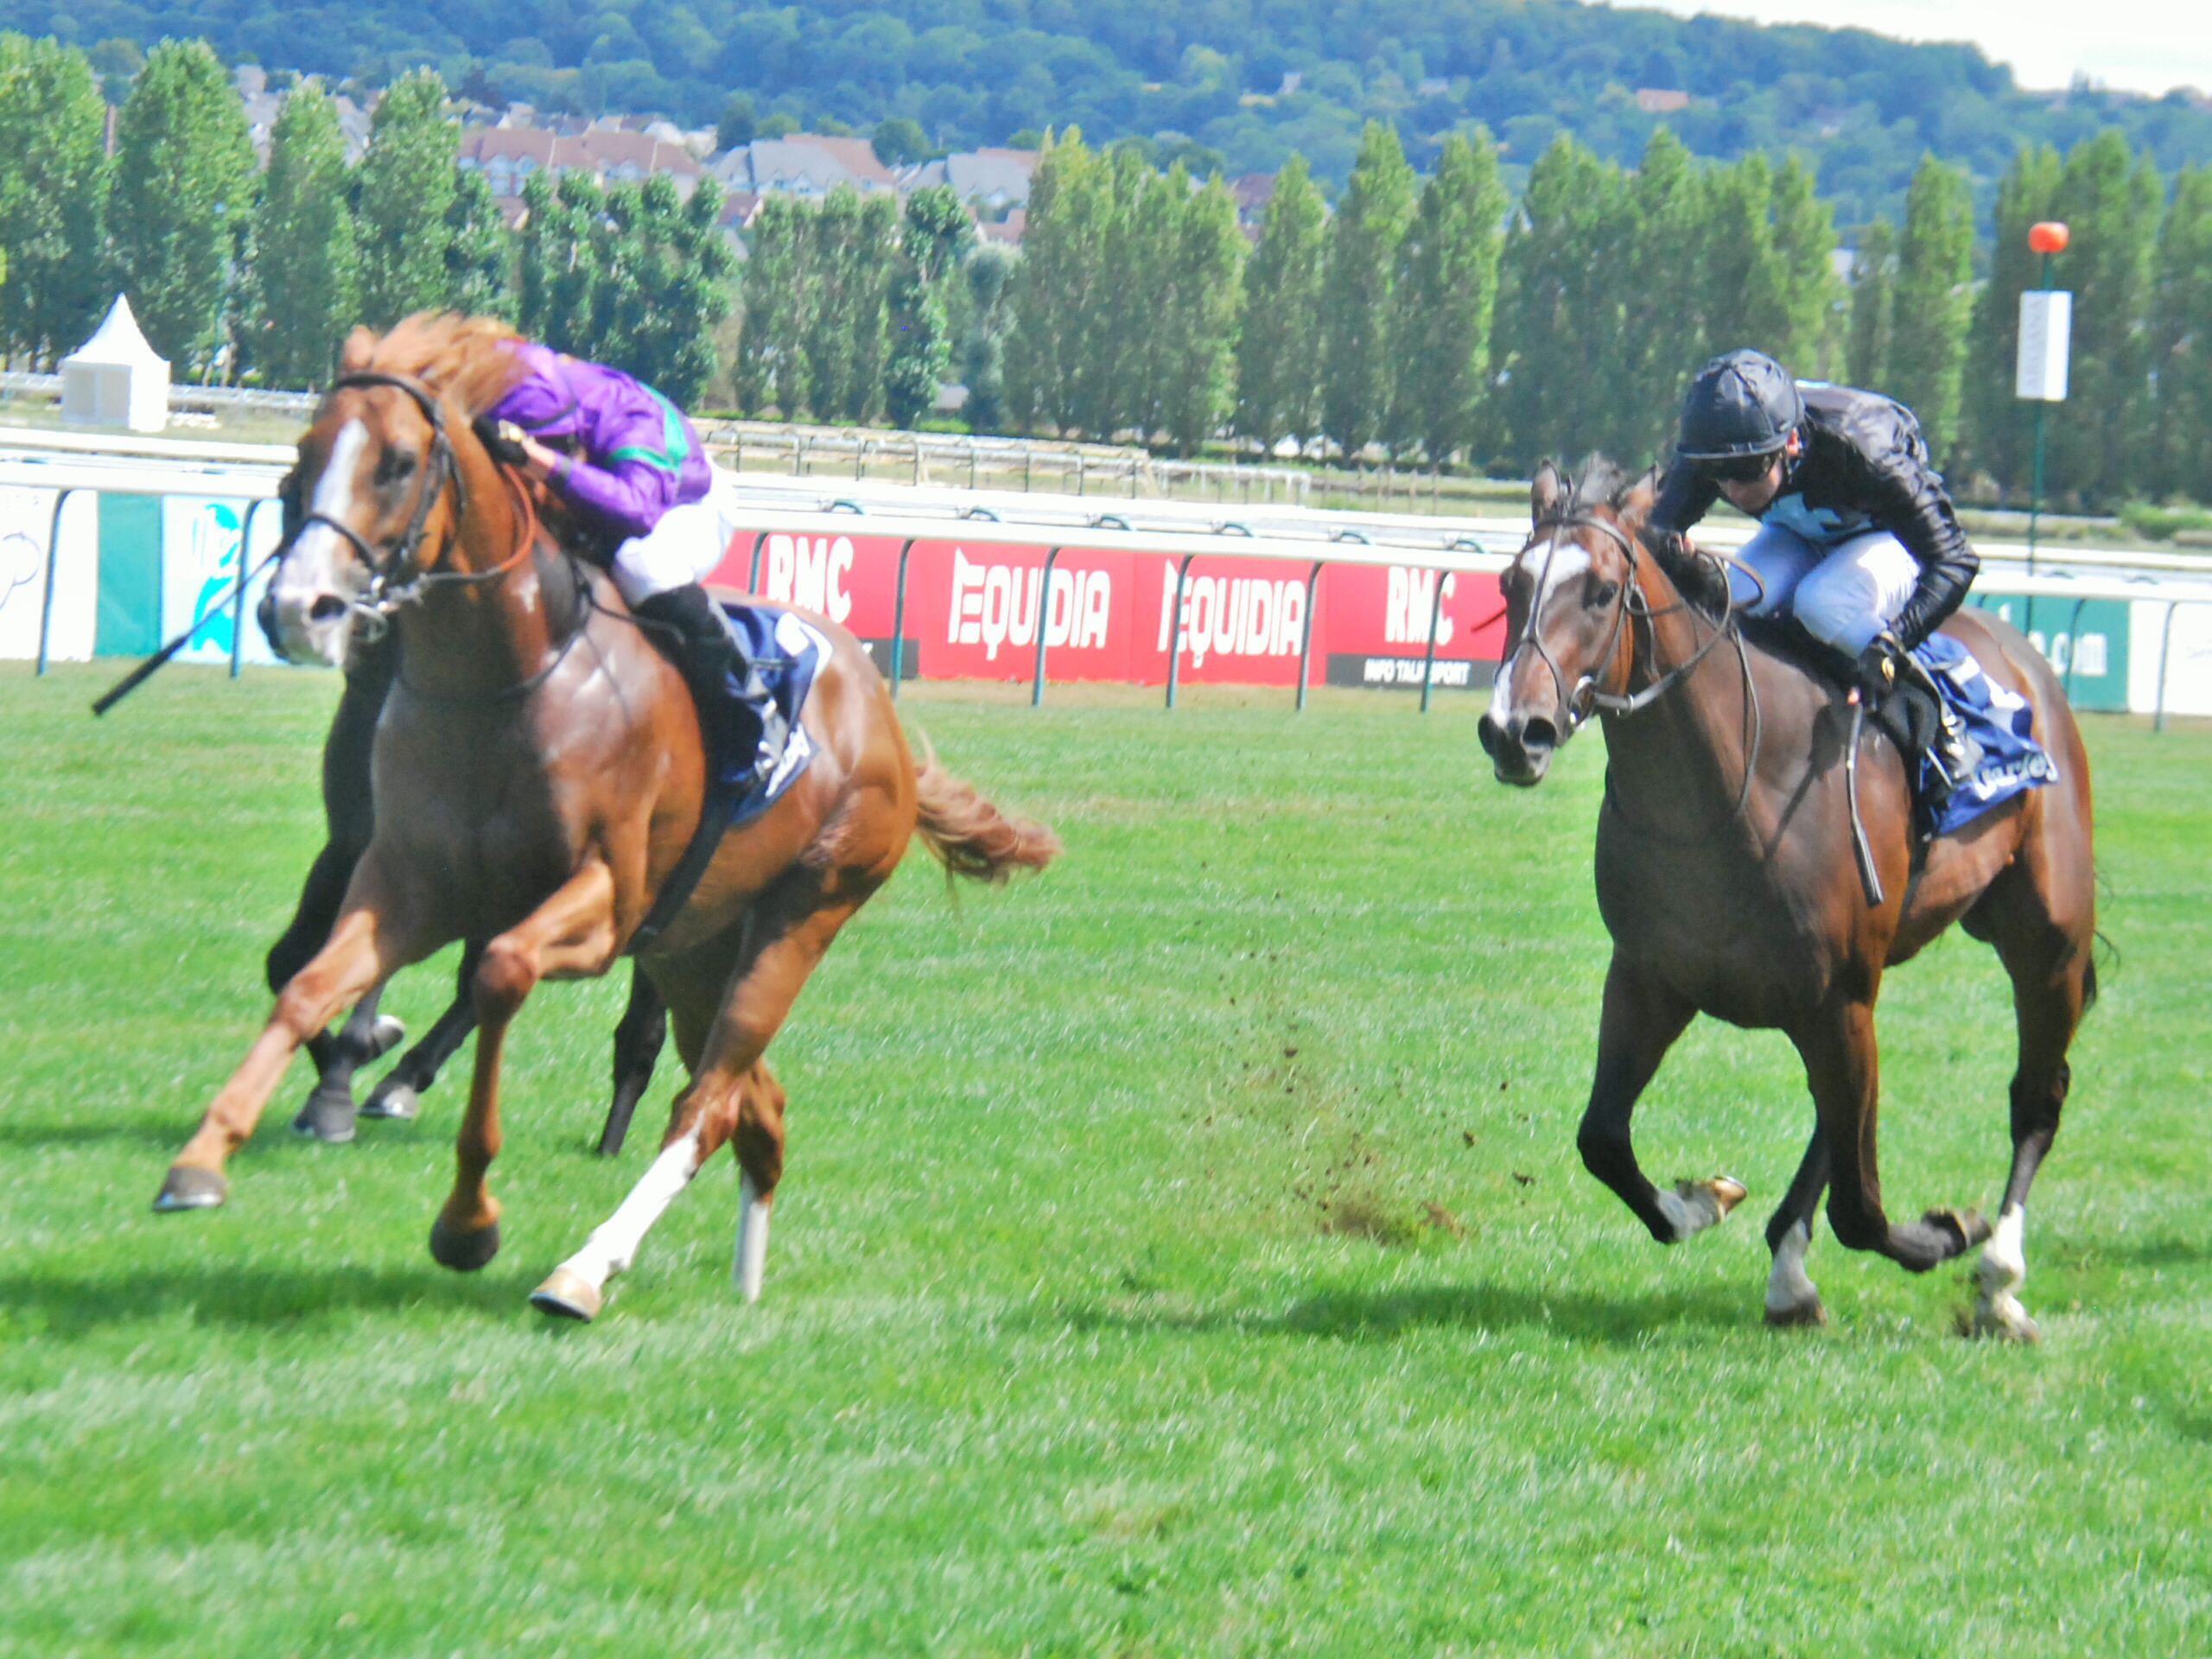 Hunscote Stud’s Cairn Gorm (Tom Marquand) wins the G3 Prix Cabourg at Deauville  last August. Photo: John Gilmore